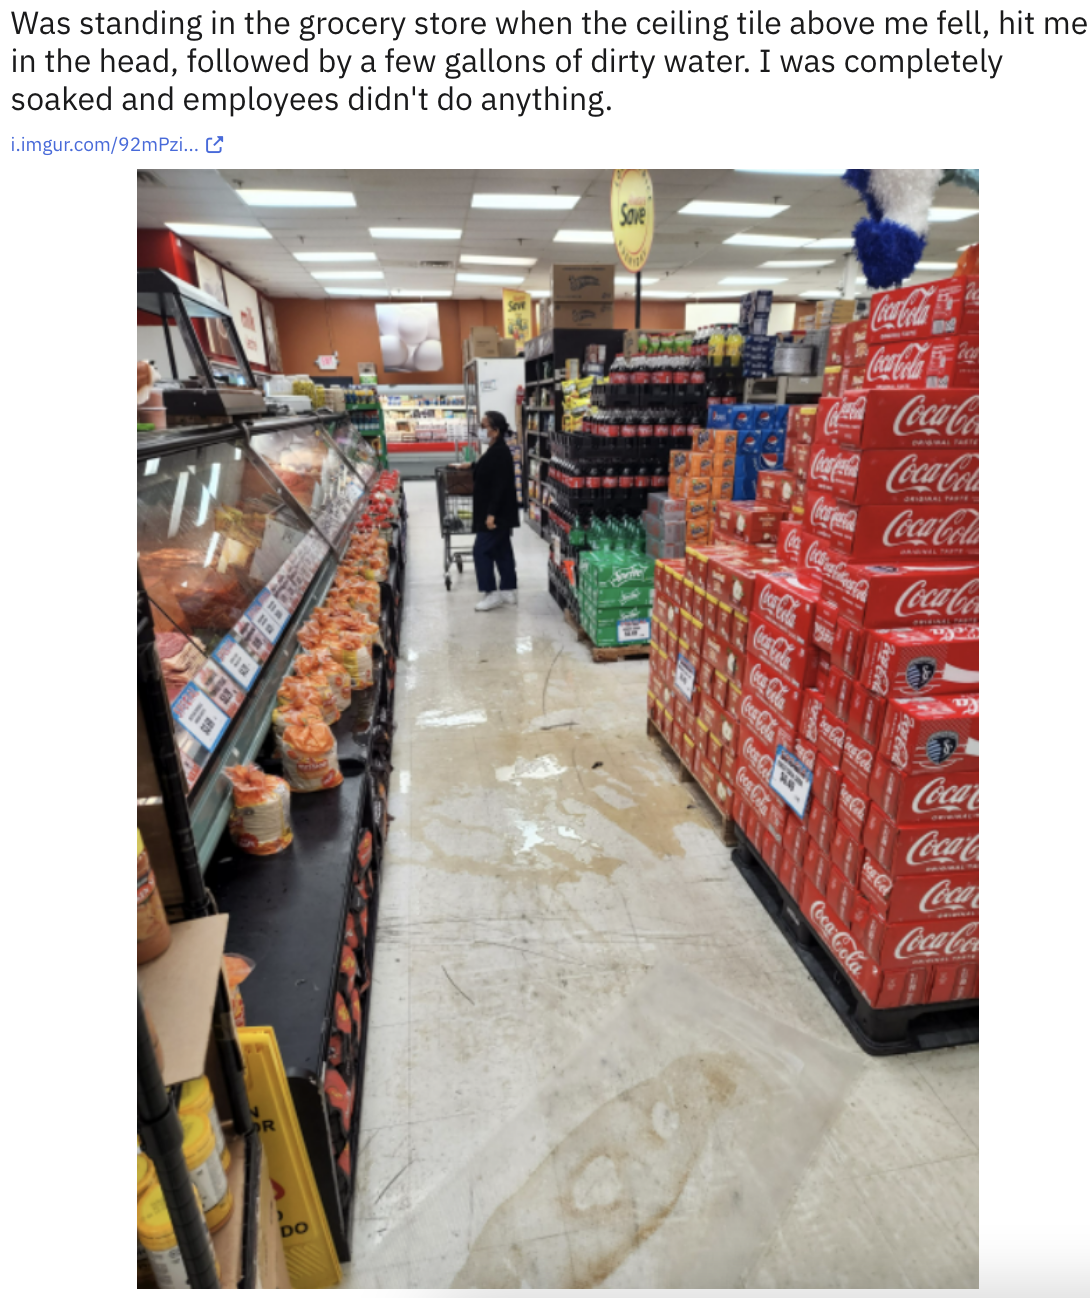 the dirty water on the floor of the grocery aisle